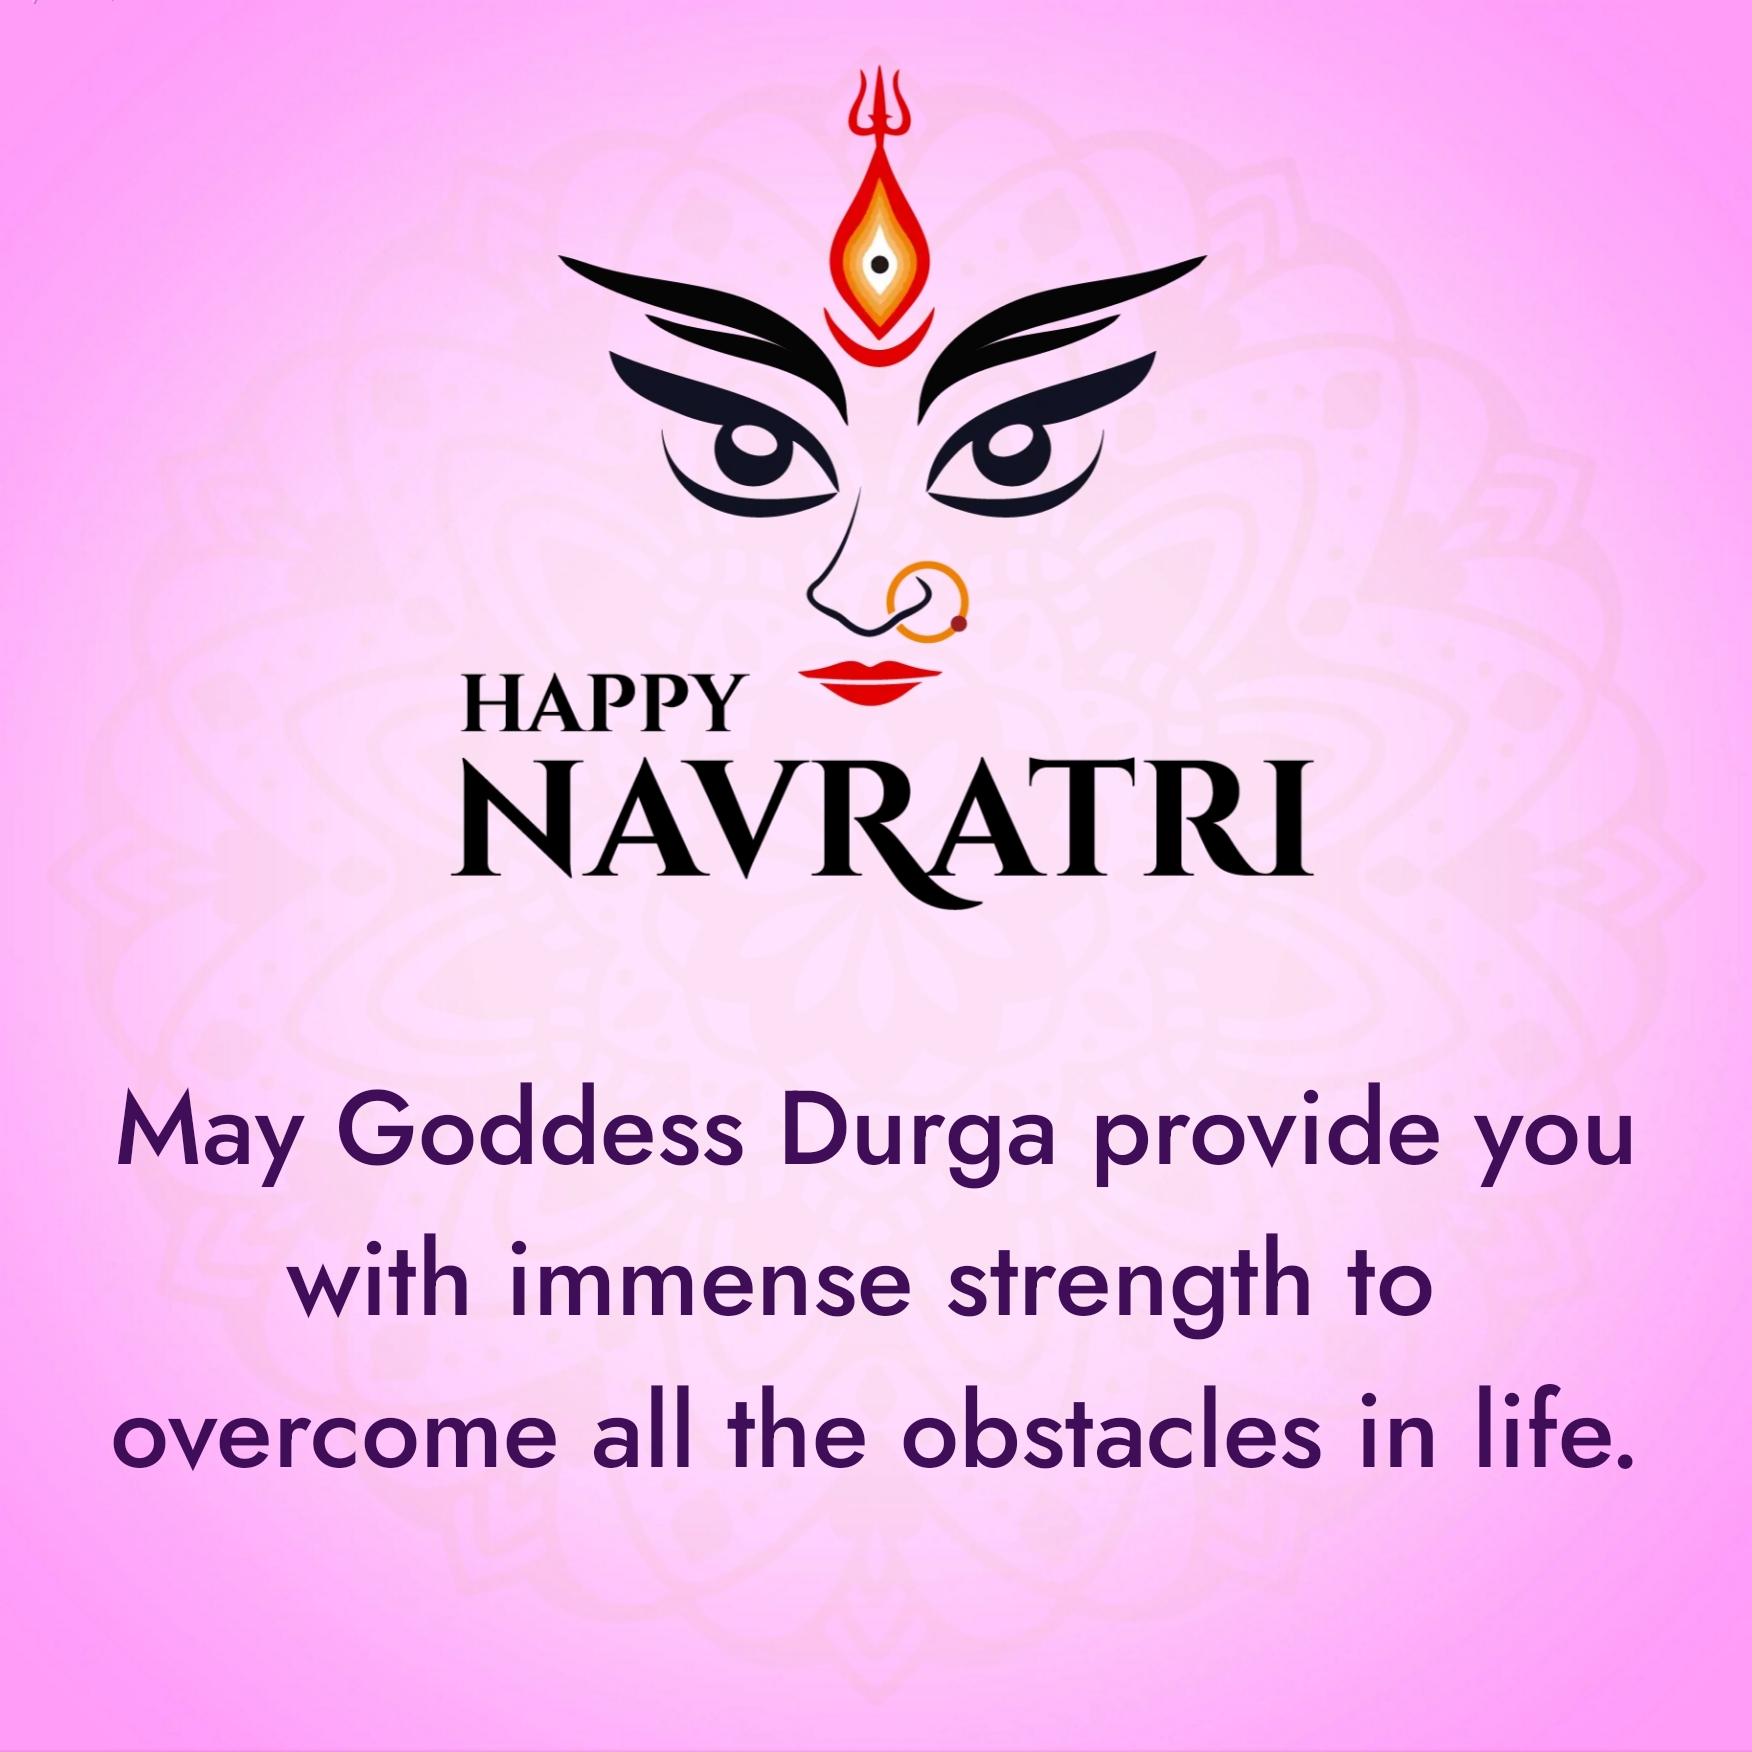 May Goddess Durga provide you with immense strength